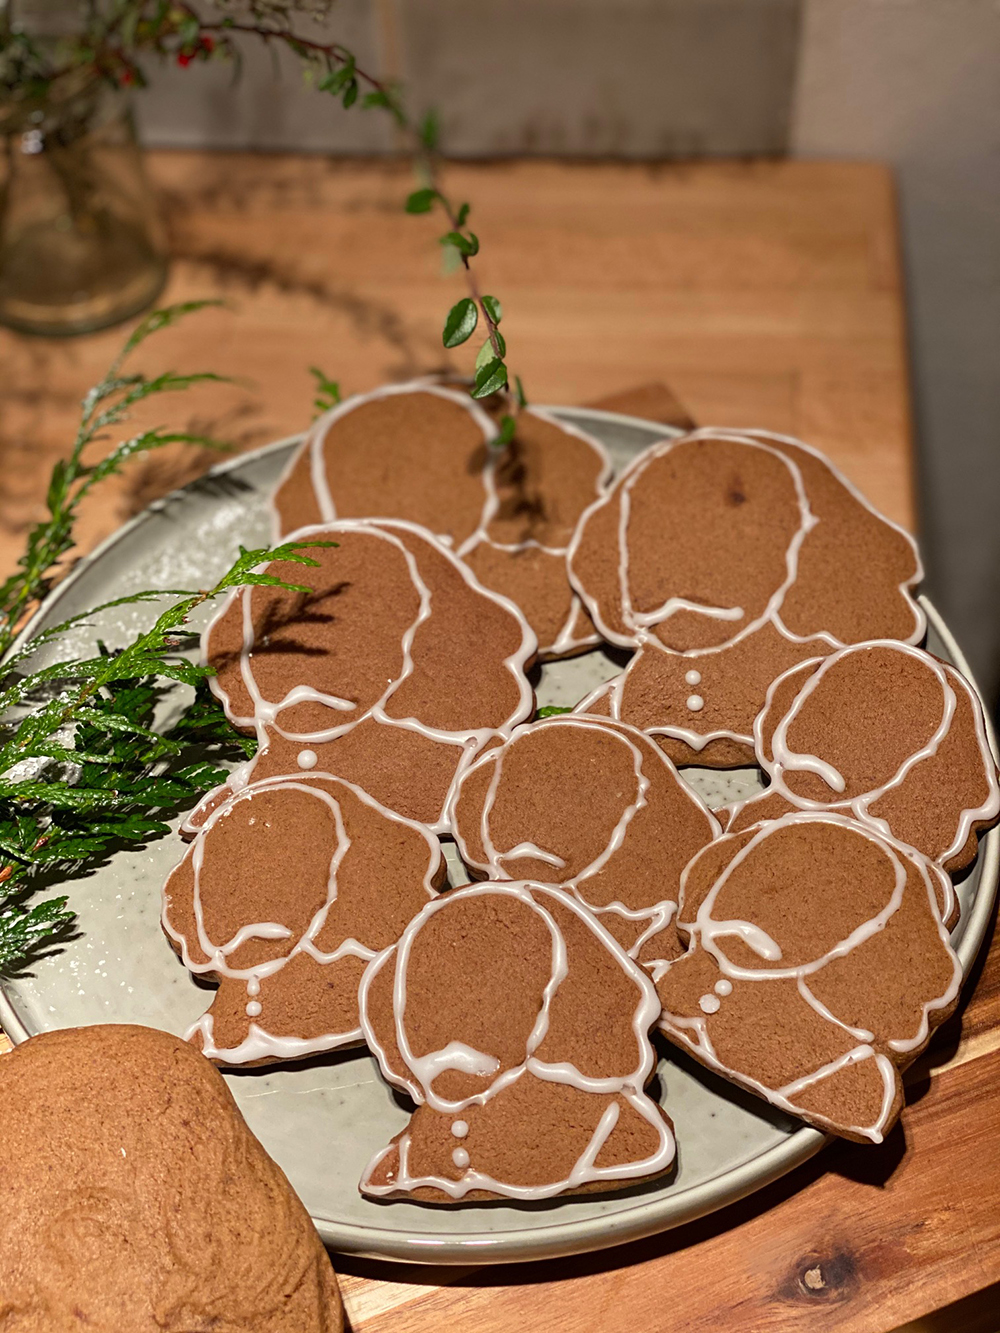 Gingerbread biscuits in the shape of Shakespeare's face rest on a plate, with icing sugar detail.